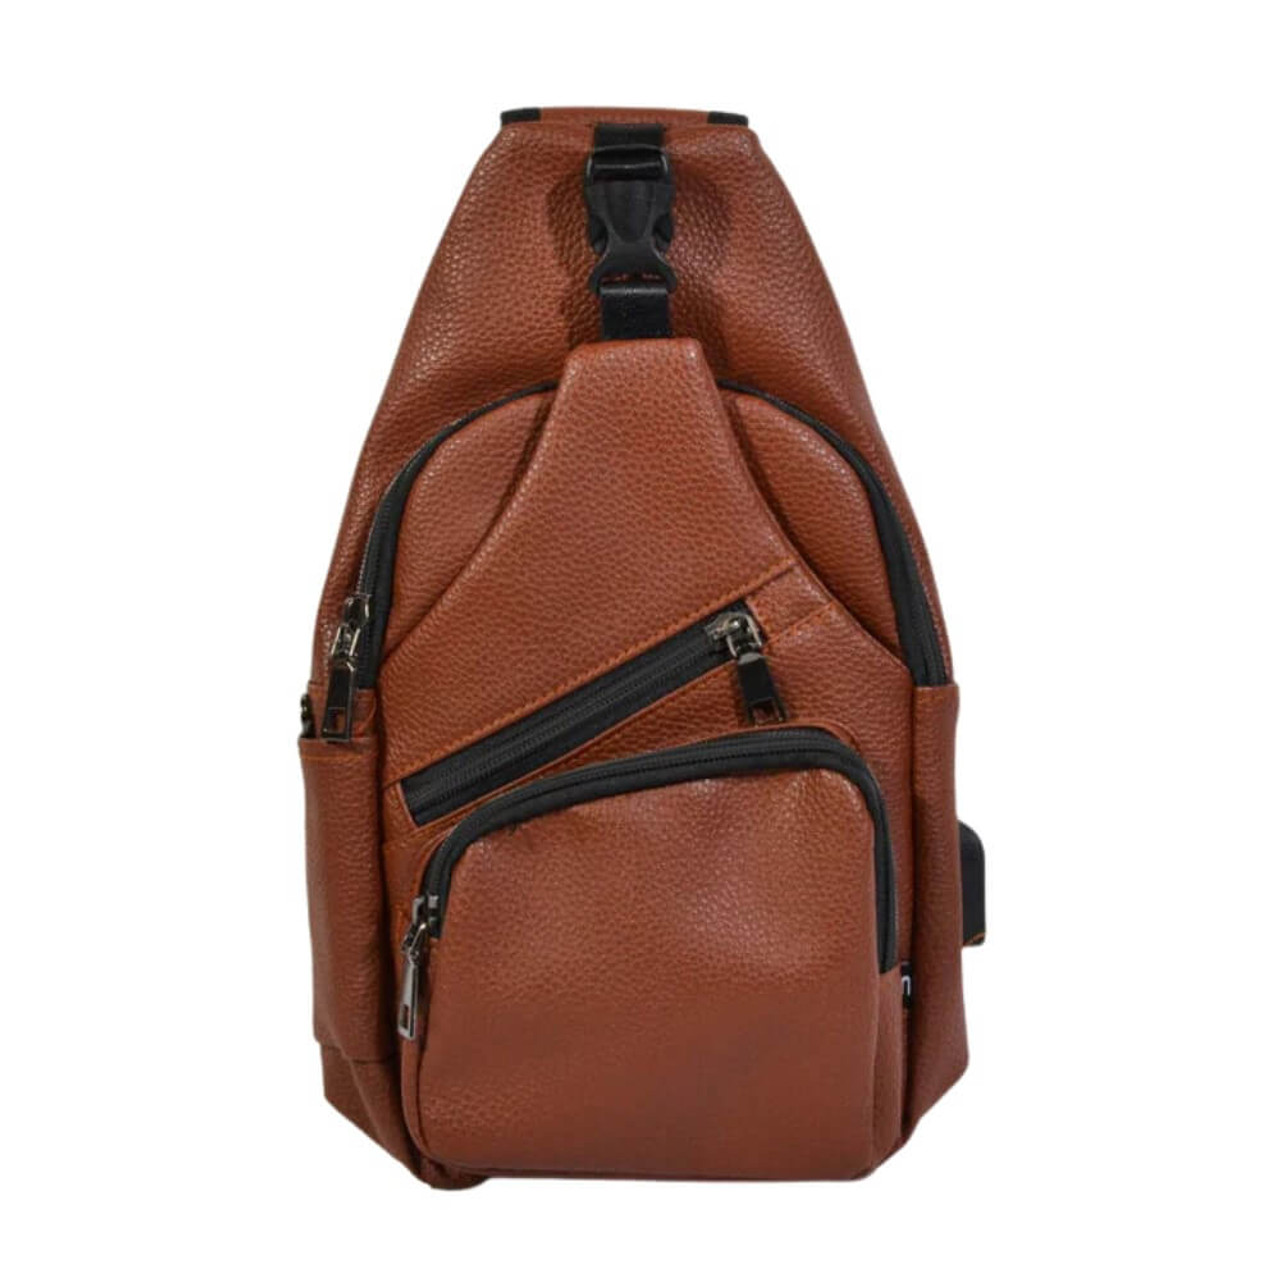 Nupouch Anti-Theft Daypack Copper